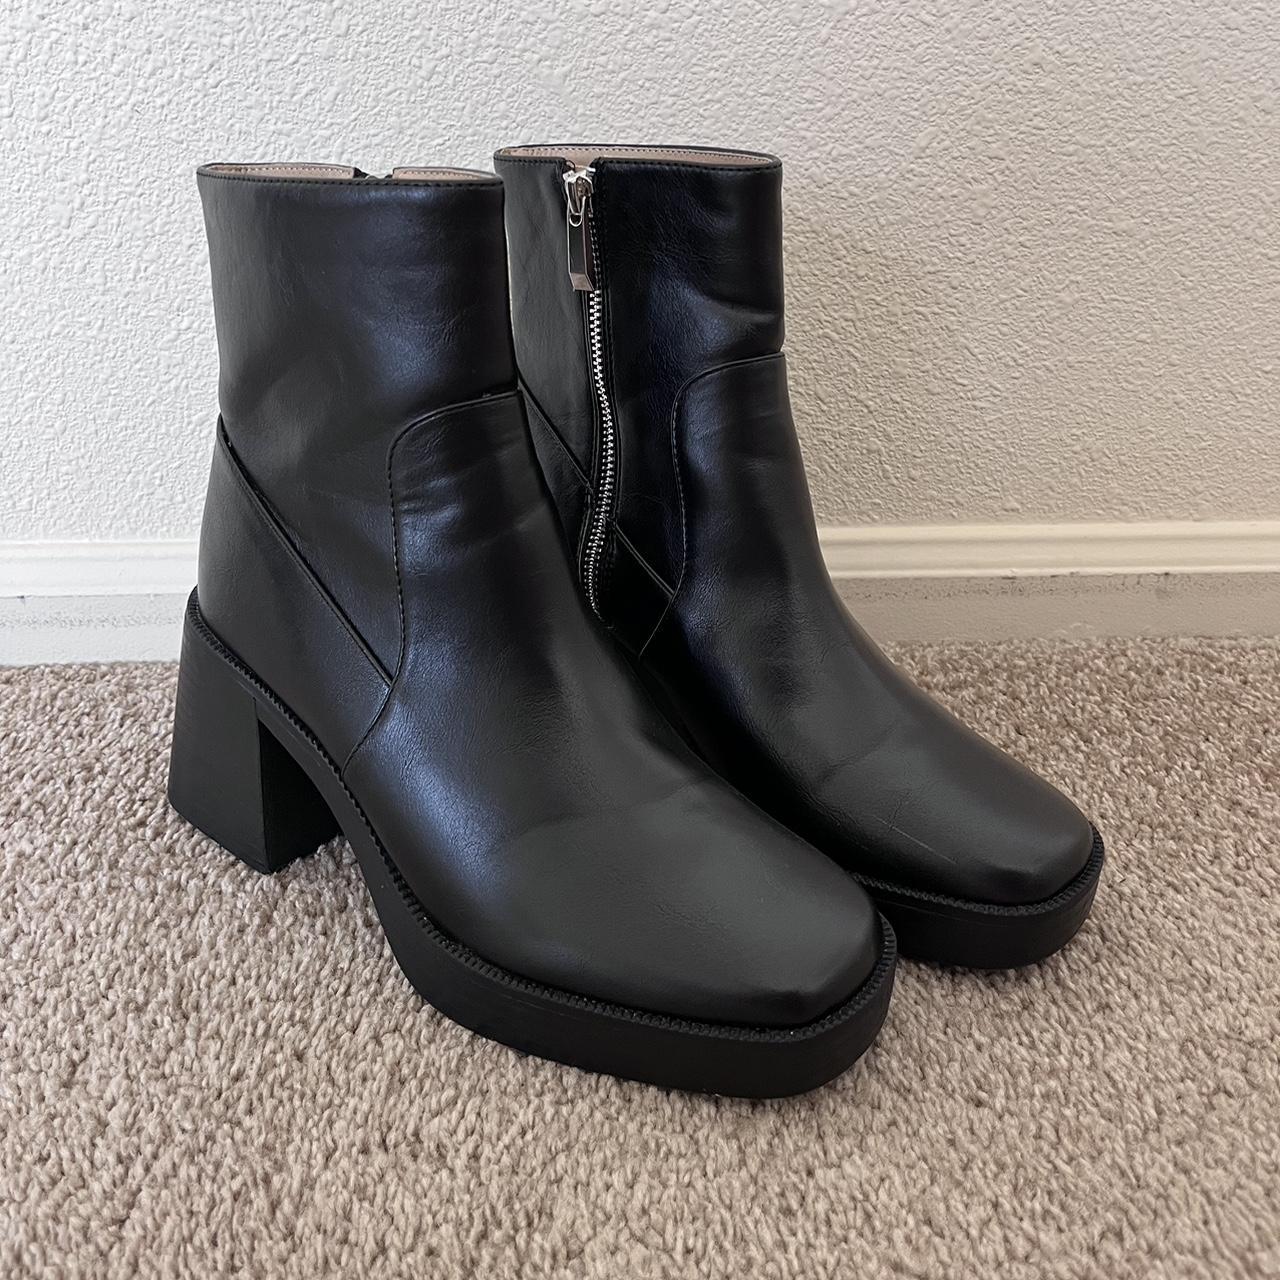 Princess Polly Halo Boots in size 8 US Women’s. I’ve... - Depop